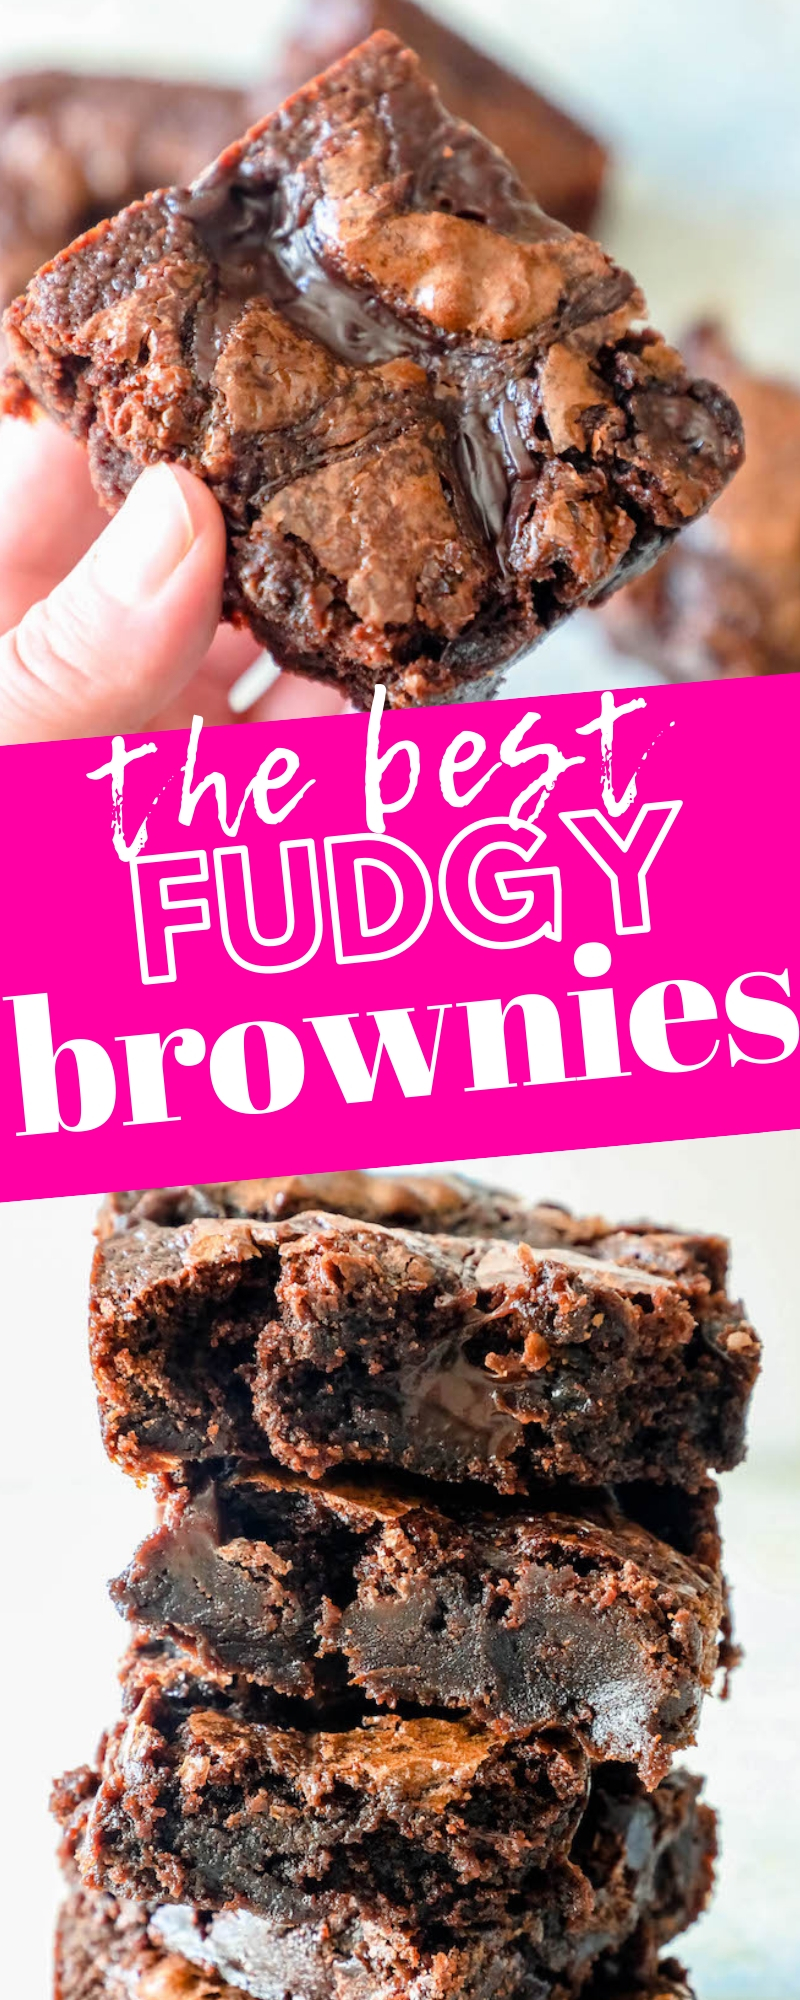 fudgy brownies stacked high  